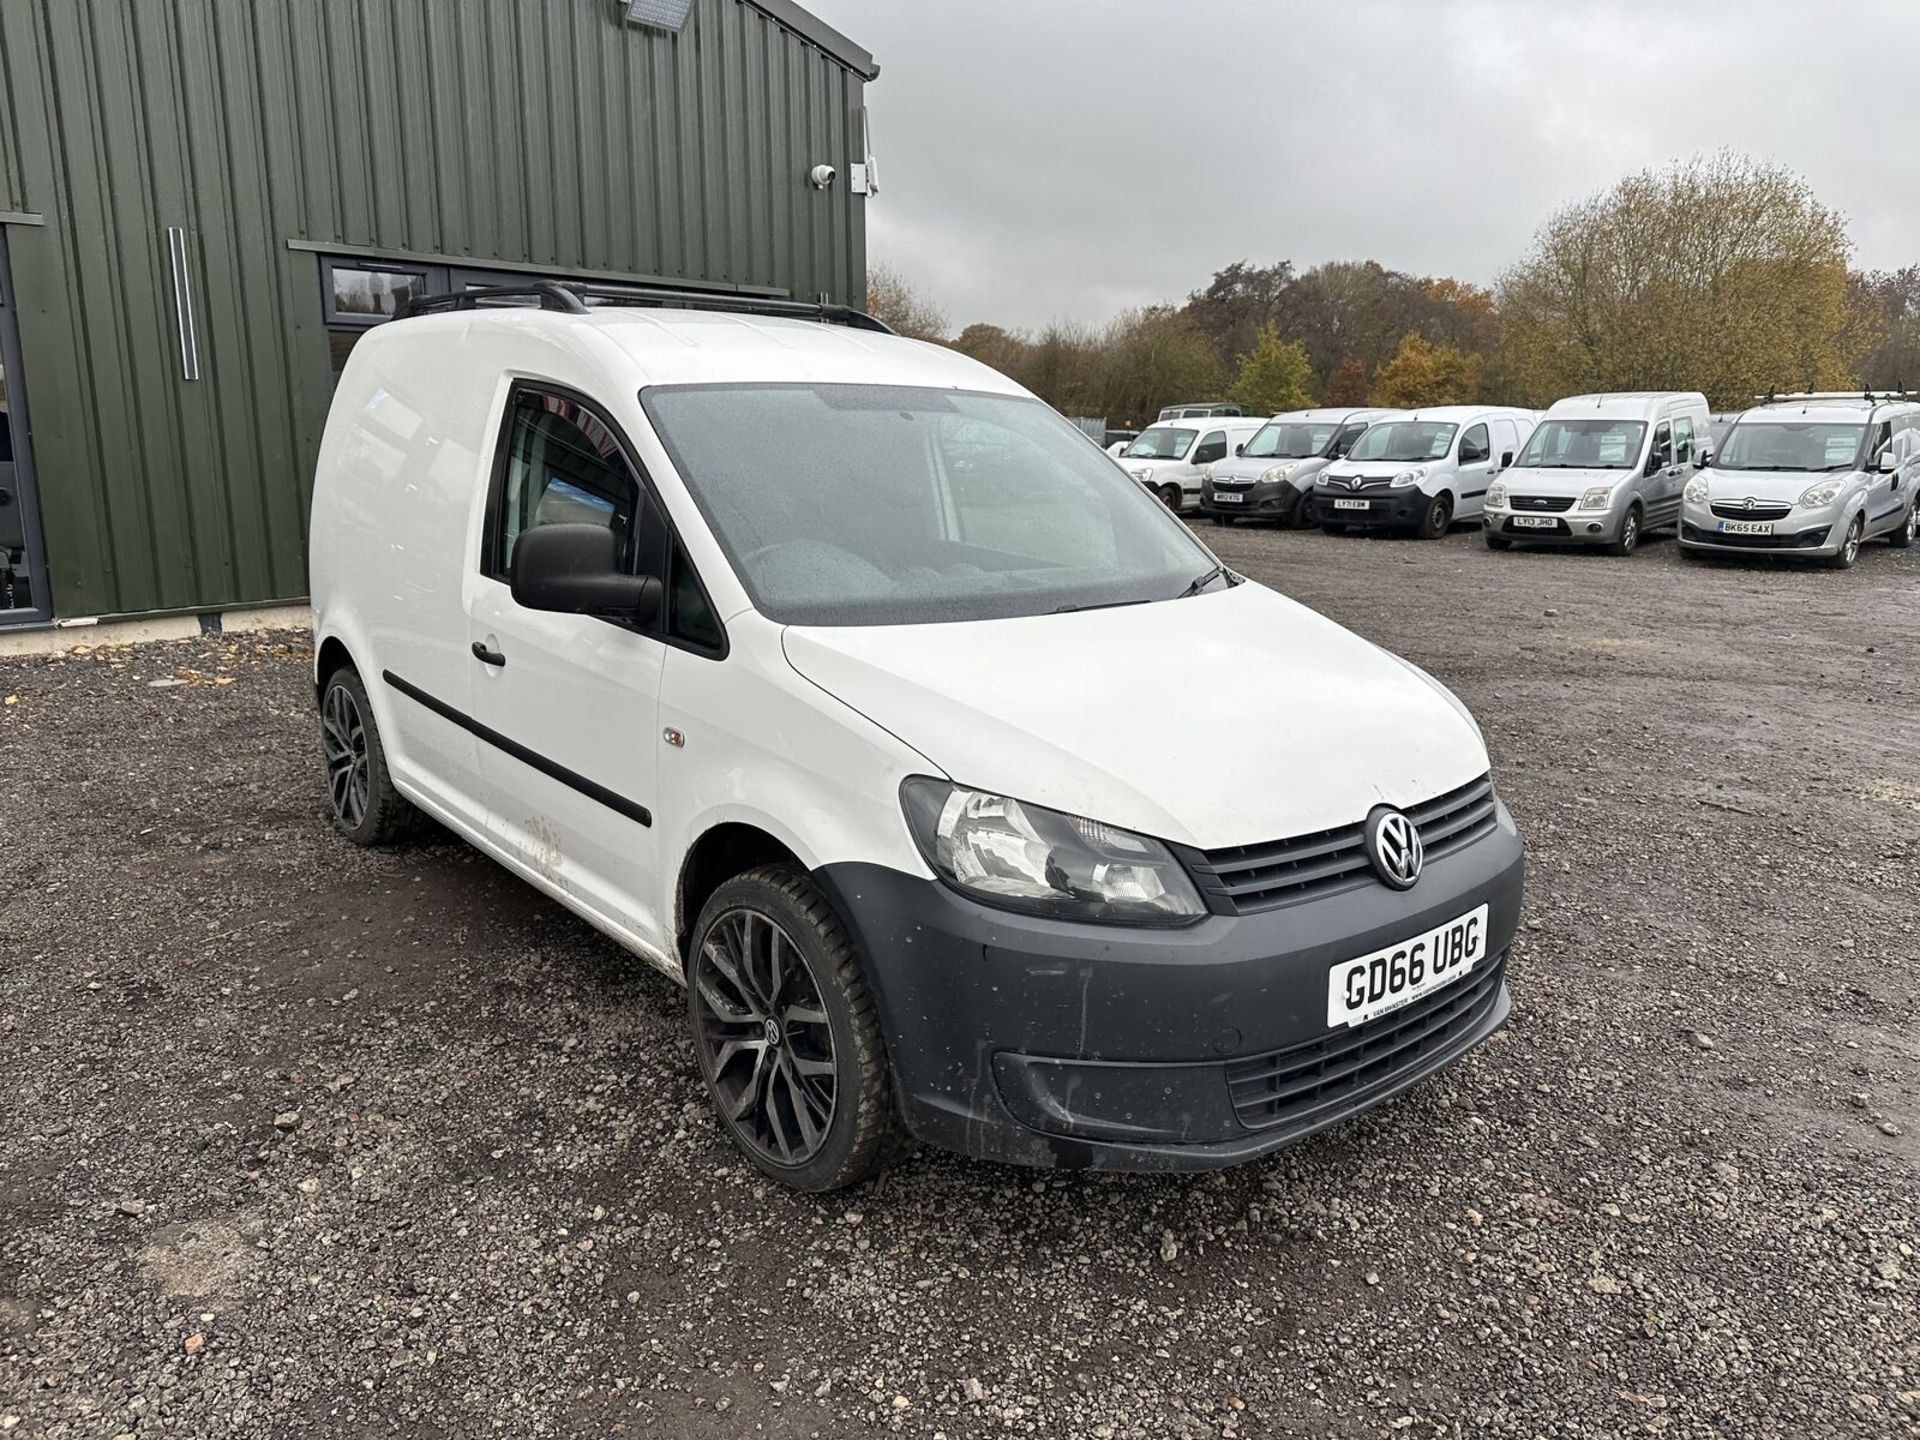 2016 VOLKSWAGEN CADDY C20 1.6 TDI - READY FOR YOUR BUSINESS >>--NO VAT ON HAMMER--<< - Image 18 of 19